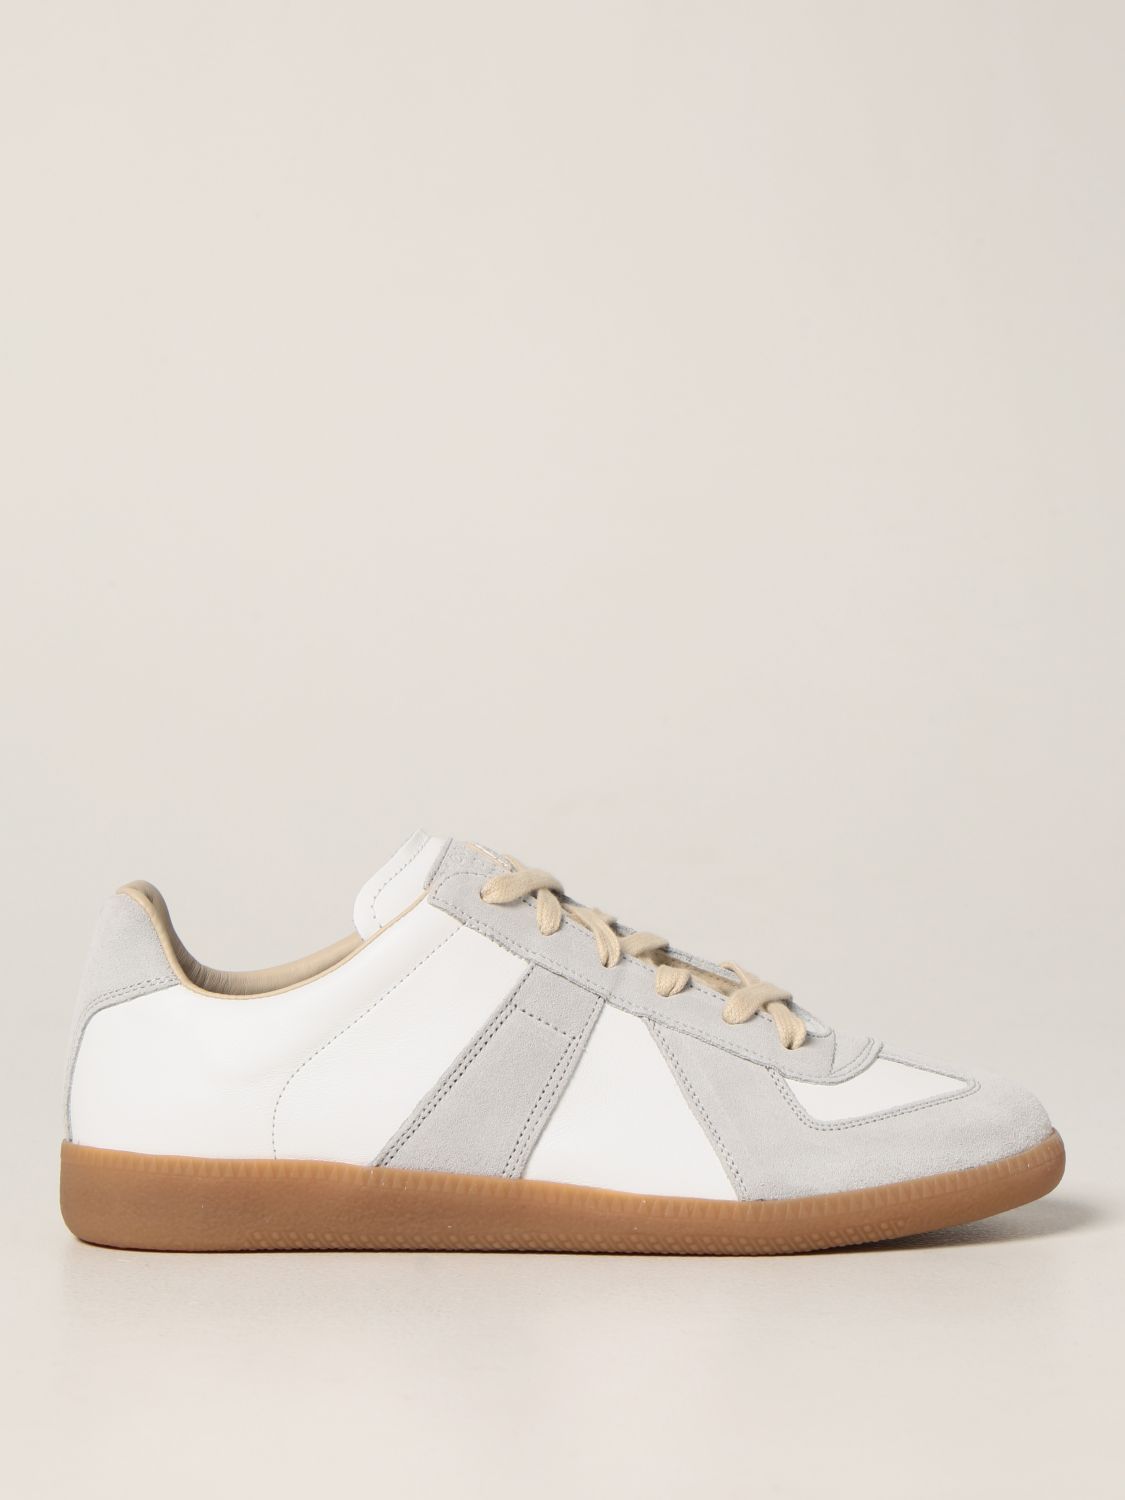 Maison Margiela Replica Suede And Leather Trainers In Multi-colored ...